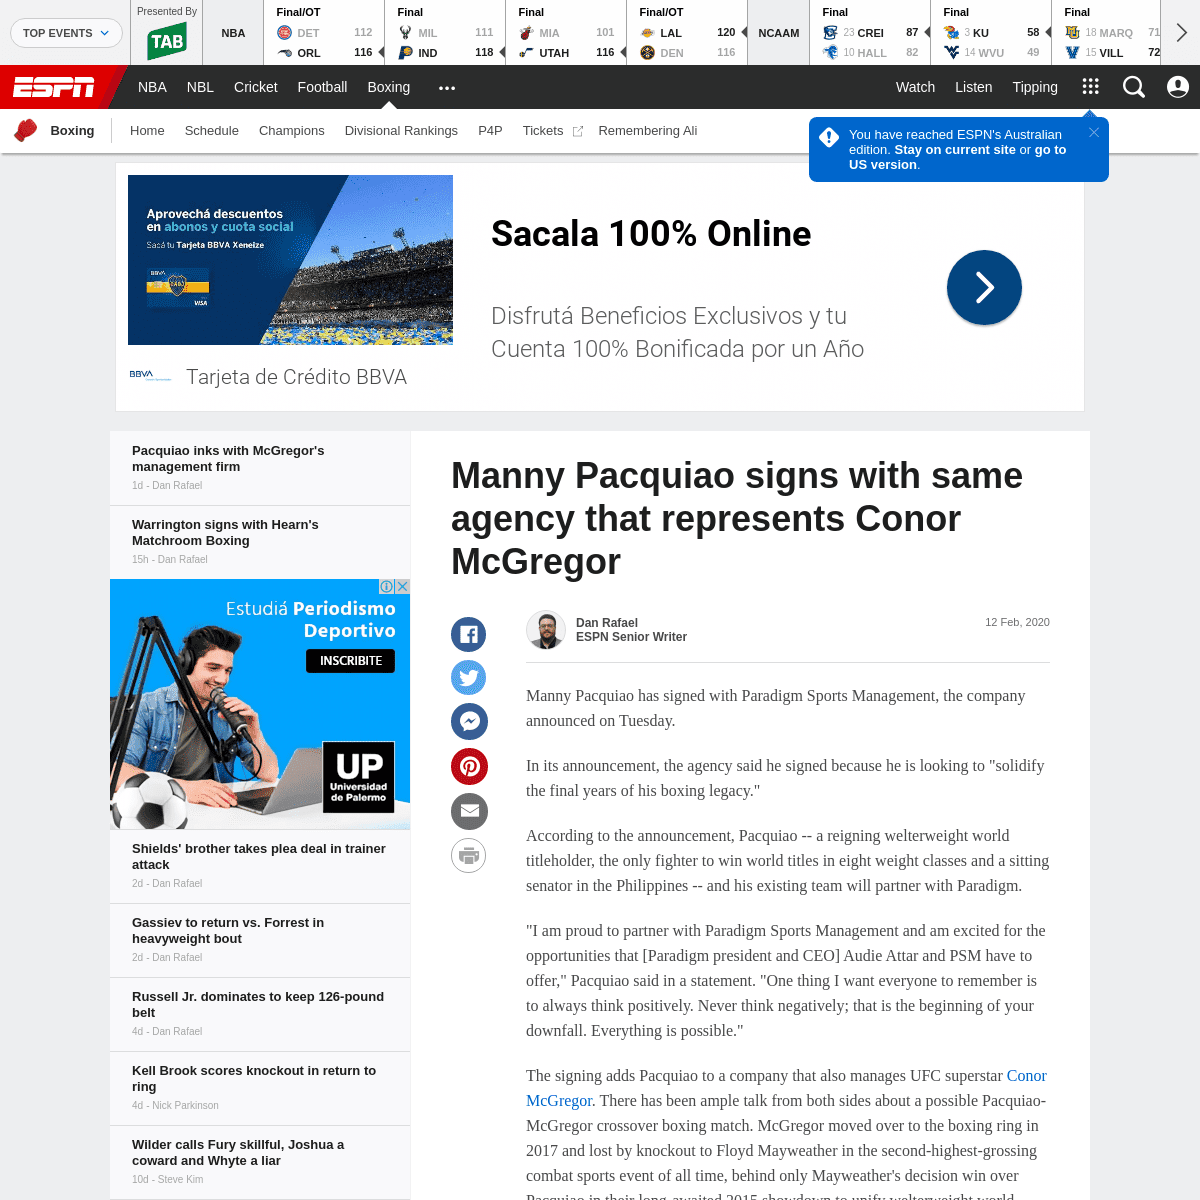 A complete backup of www.espn.com.au/boxing/story/_/id/28681852/manny-pacquiao-signs-same-agency-represents-conor-mcgregor